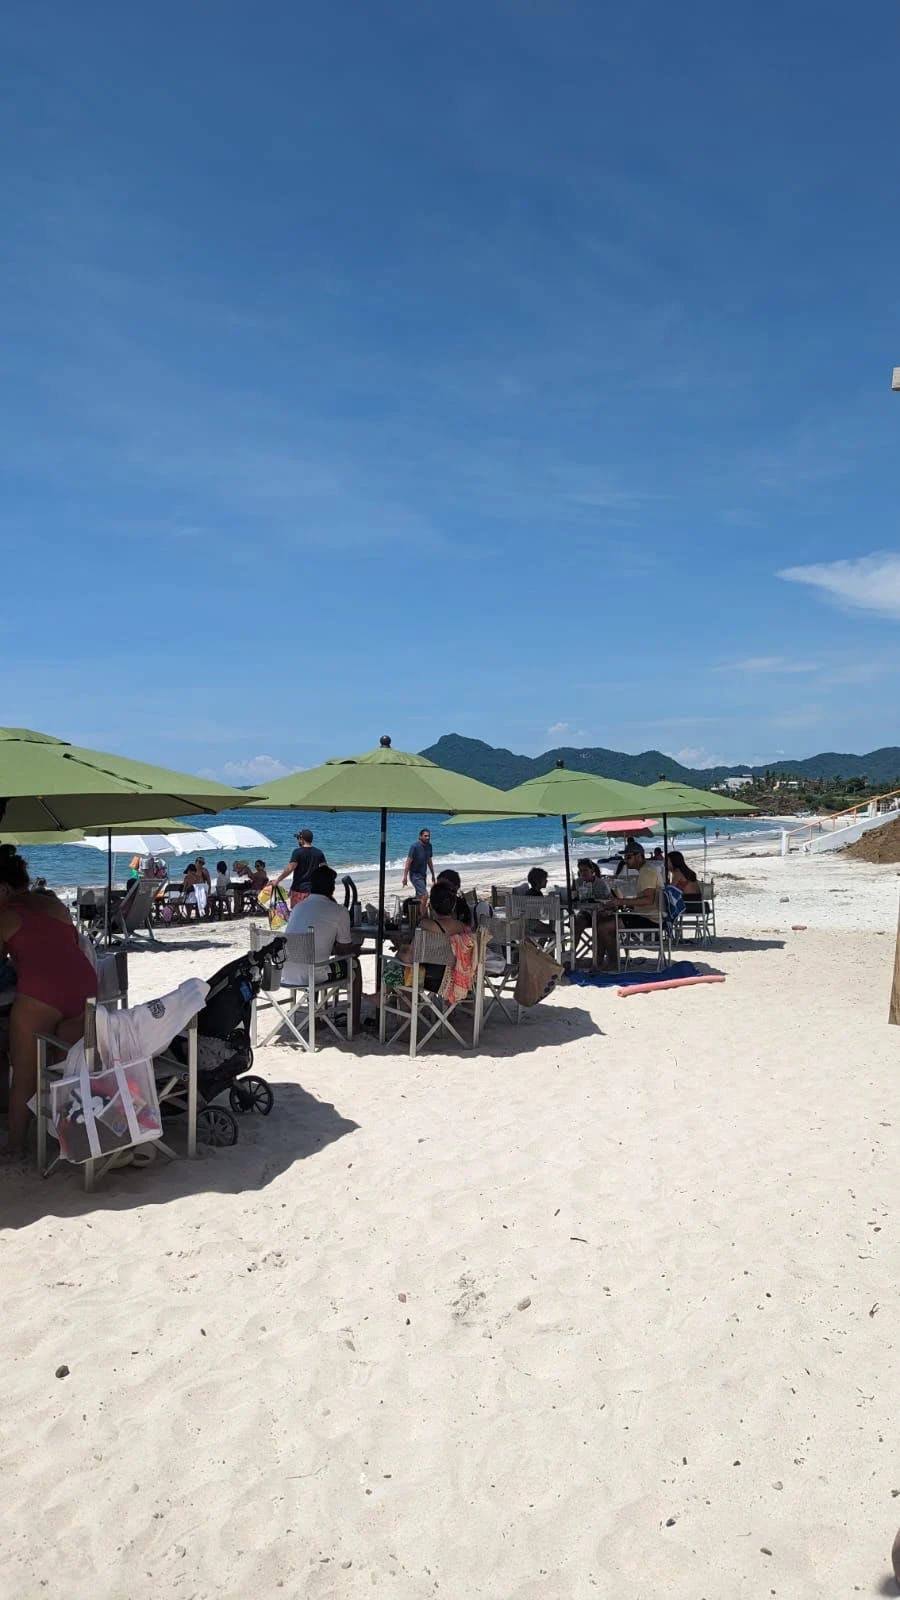 A dining area on the beach during the daytime